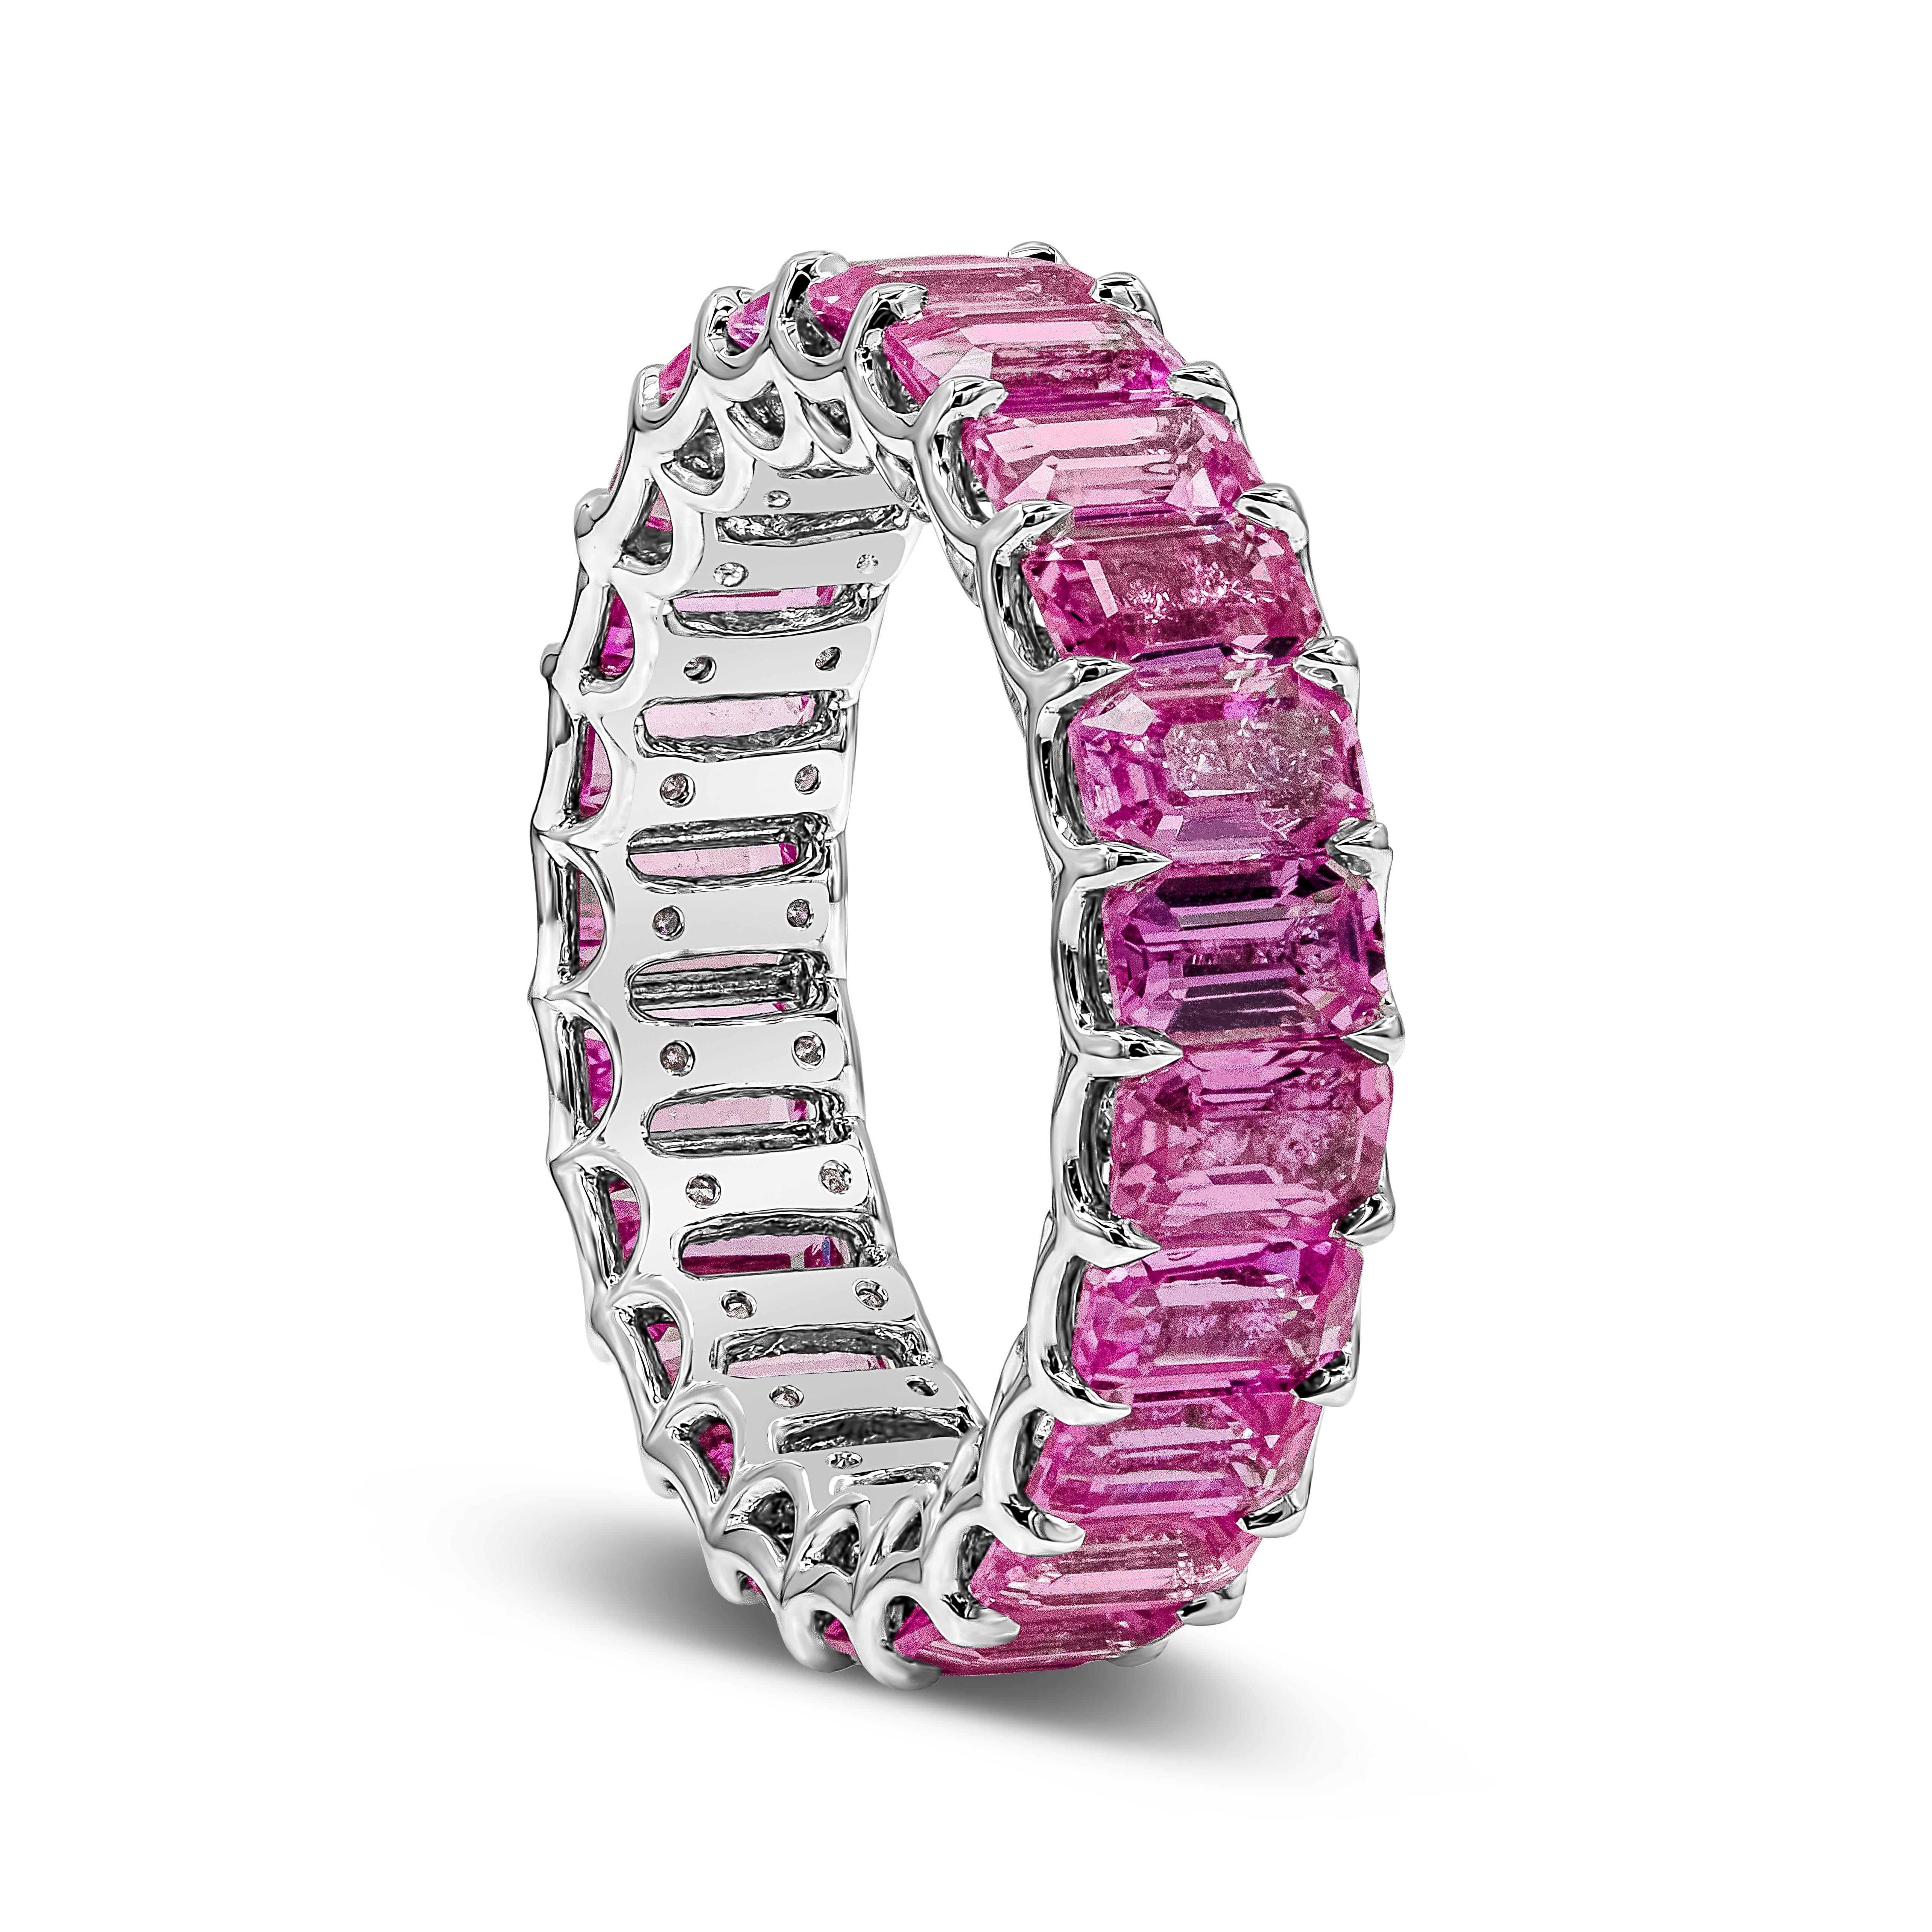 A unique eternity ring style showcasing a row of emerald cut pink sapphires weighing 7.66 carats total. Inside the basket of the sapphires are round brilliant diamonds set underneath the gemstones to make the piece sparkle. Melee brilliant round